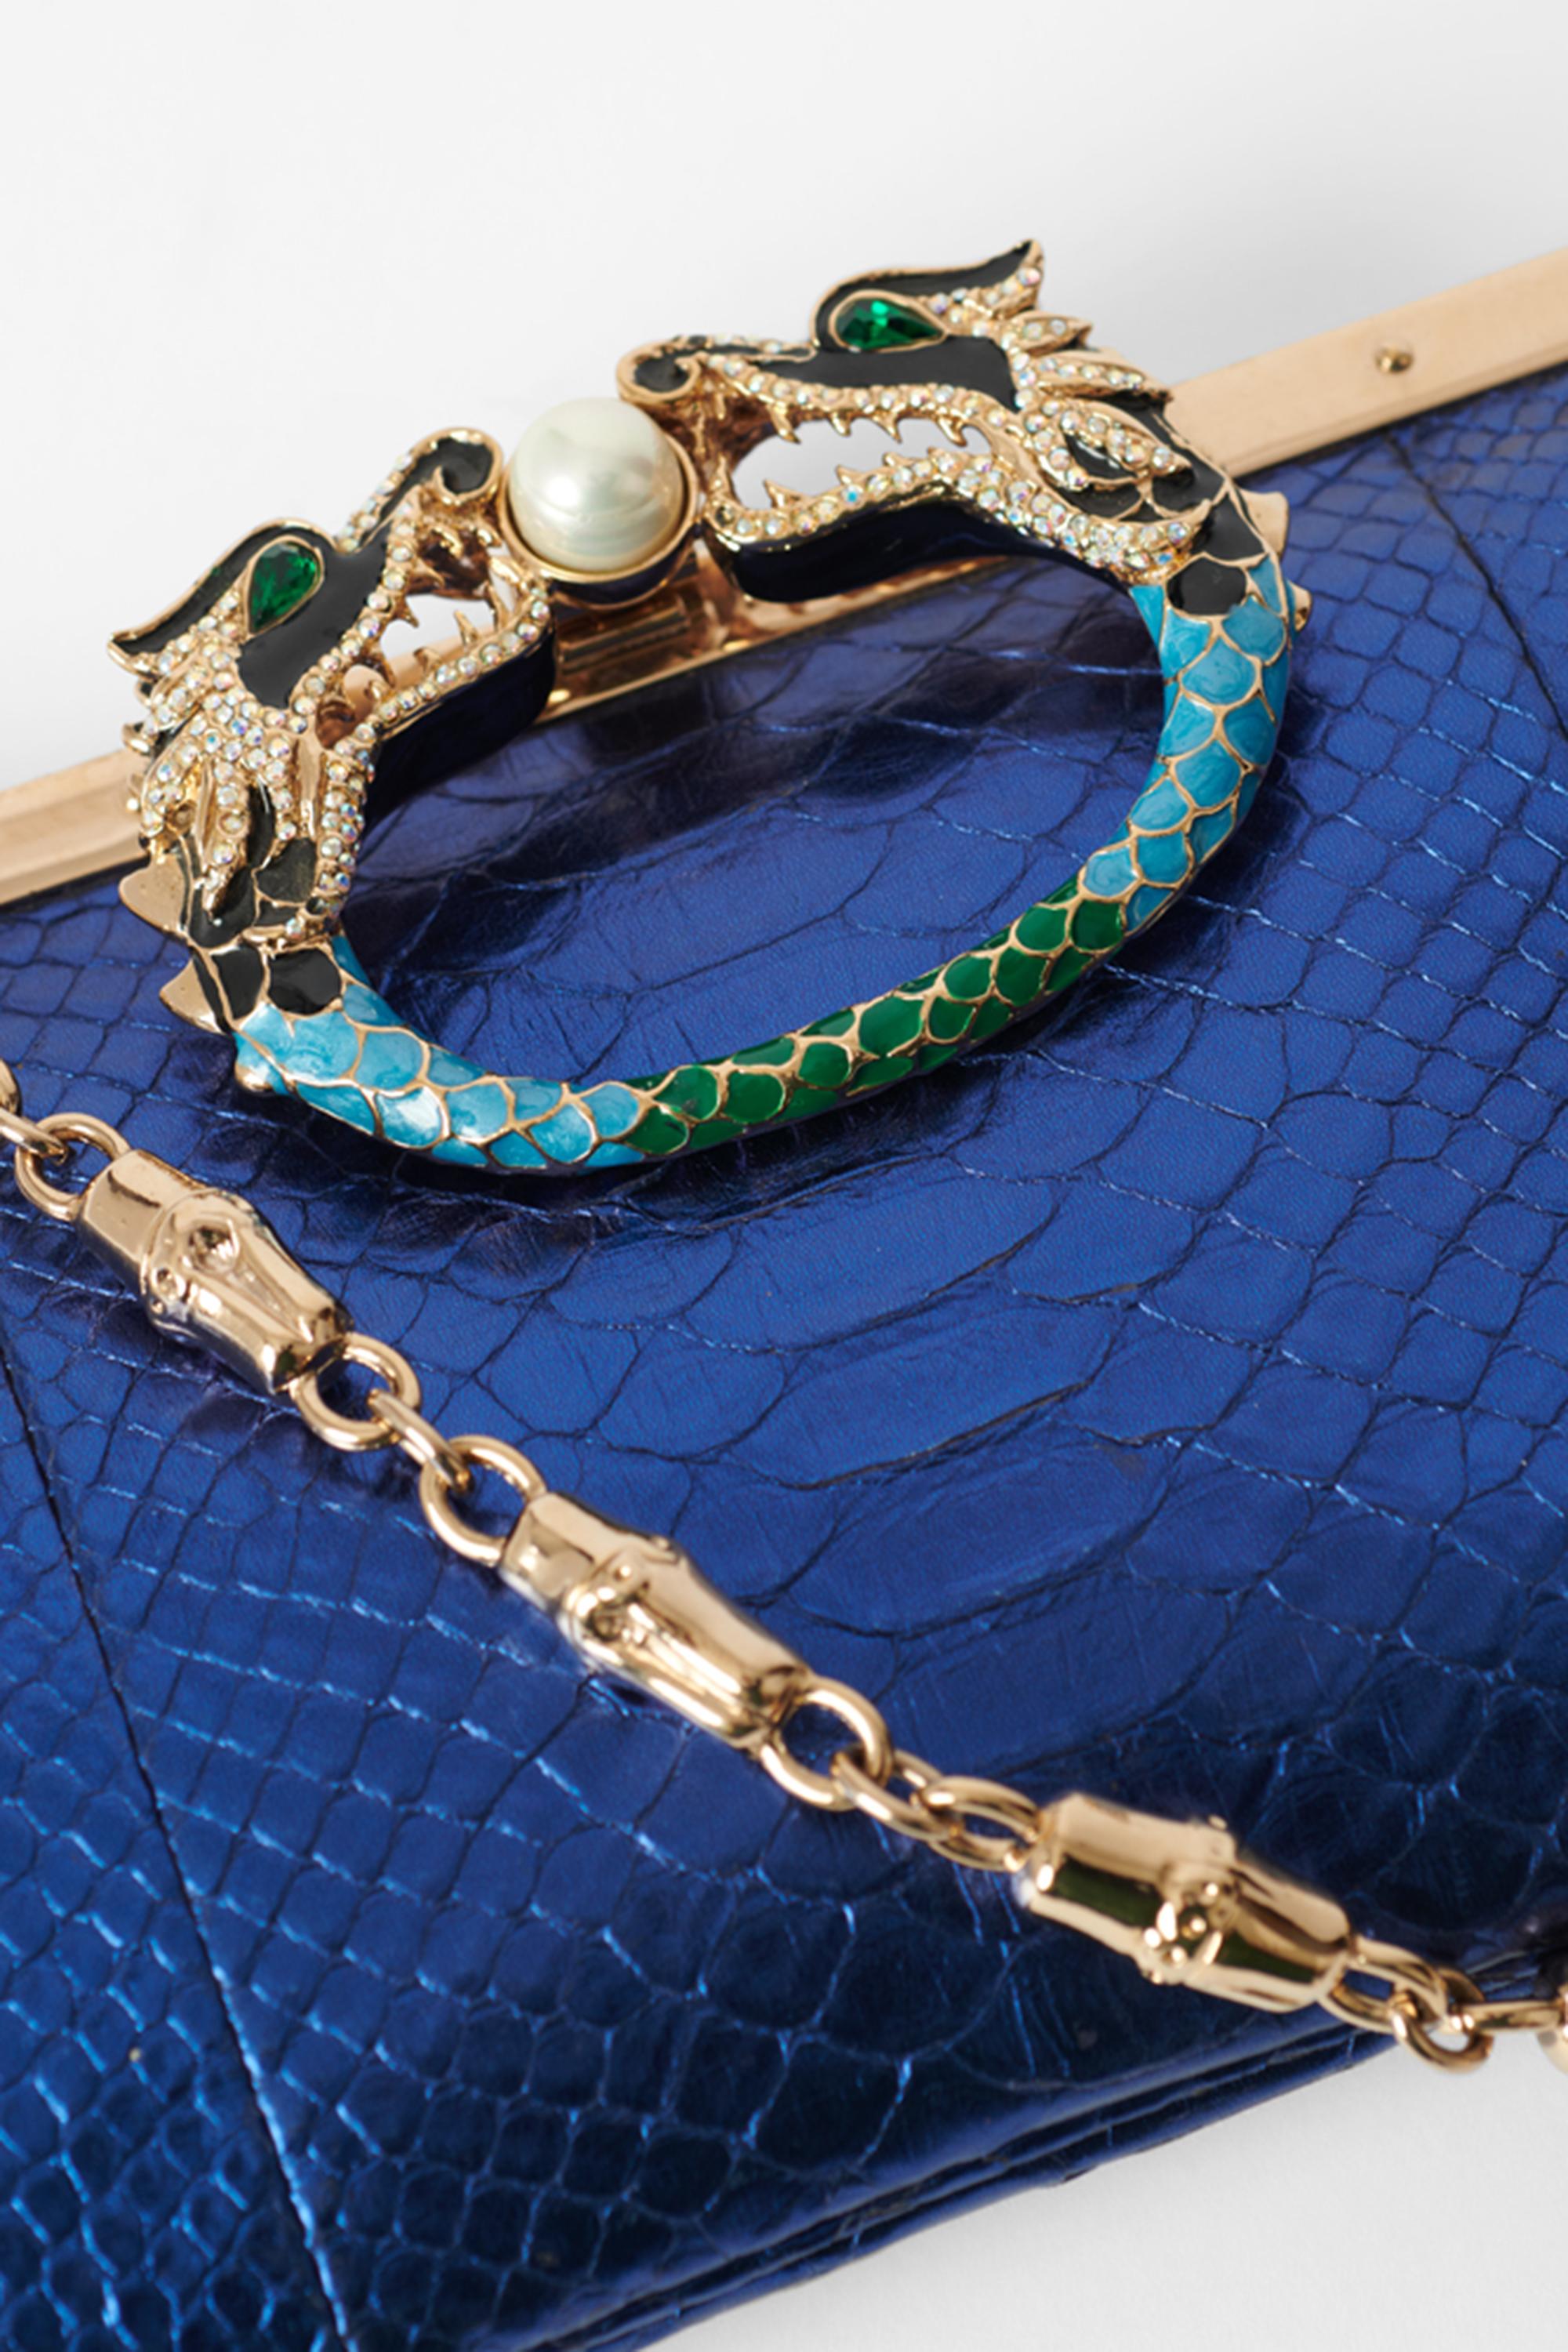 Gucci F/W 2004 Blue Iridescent Python Clutch In Good Condition For Sale In London, GB